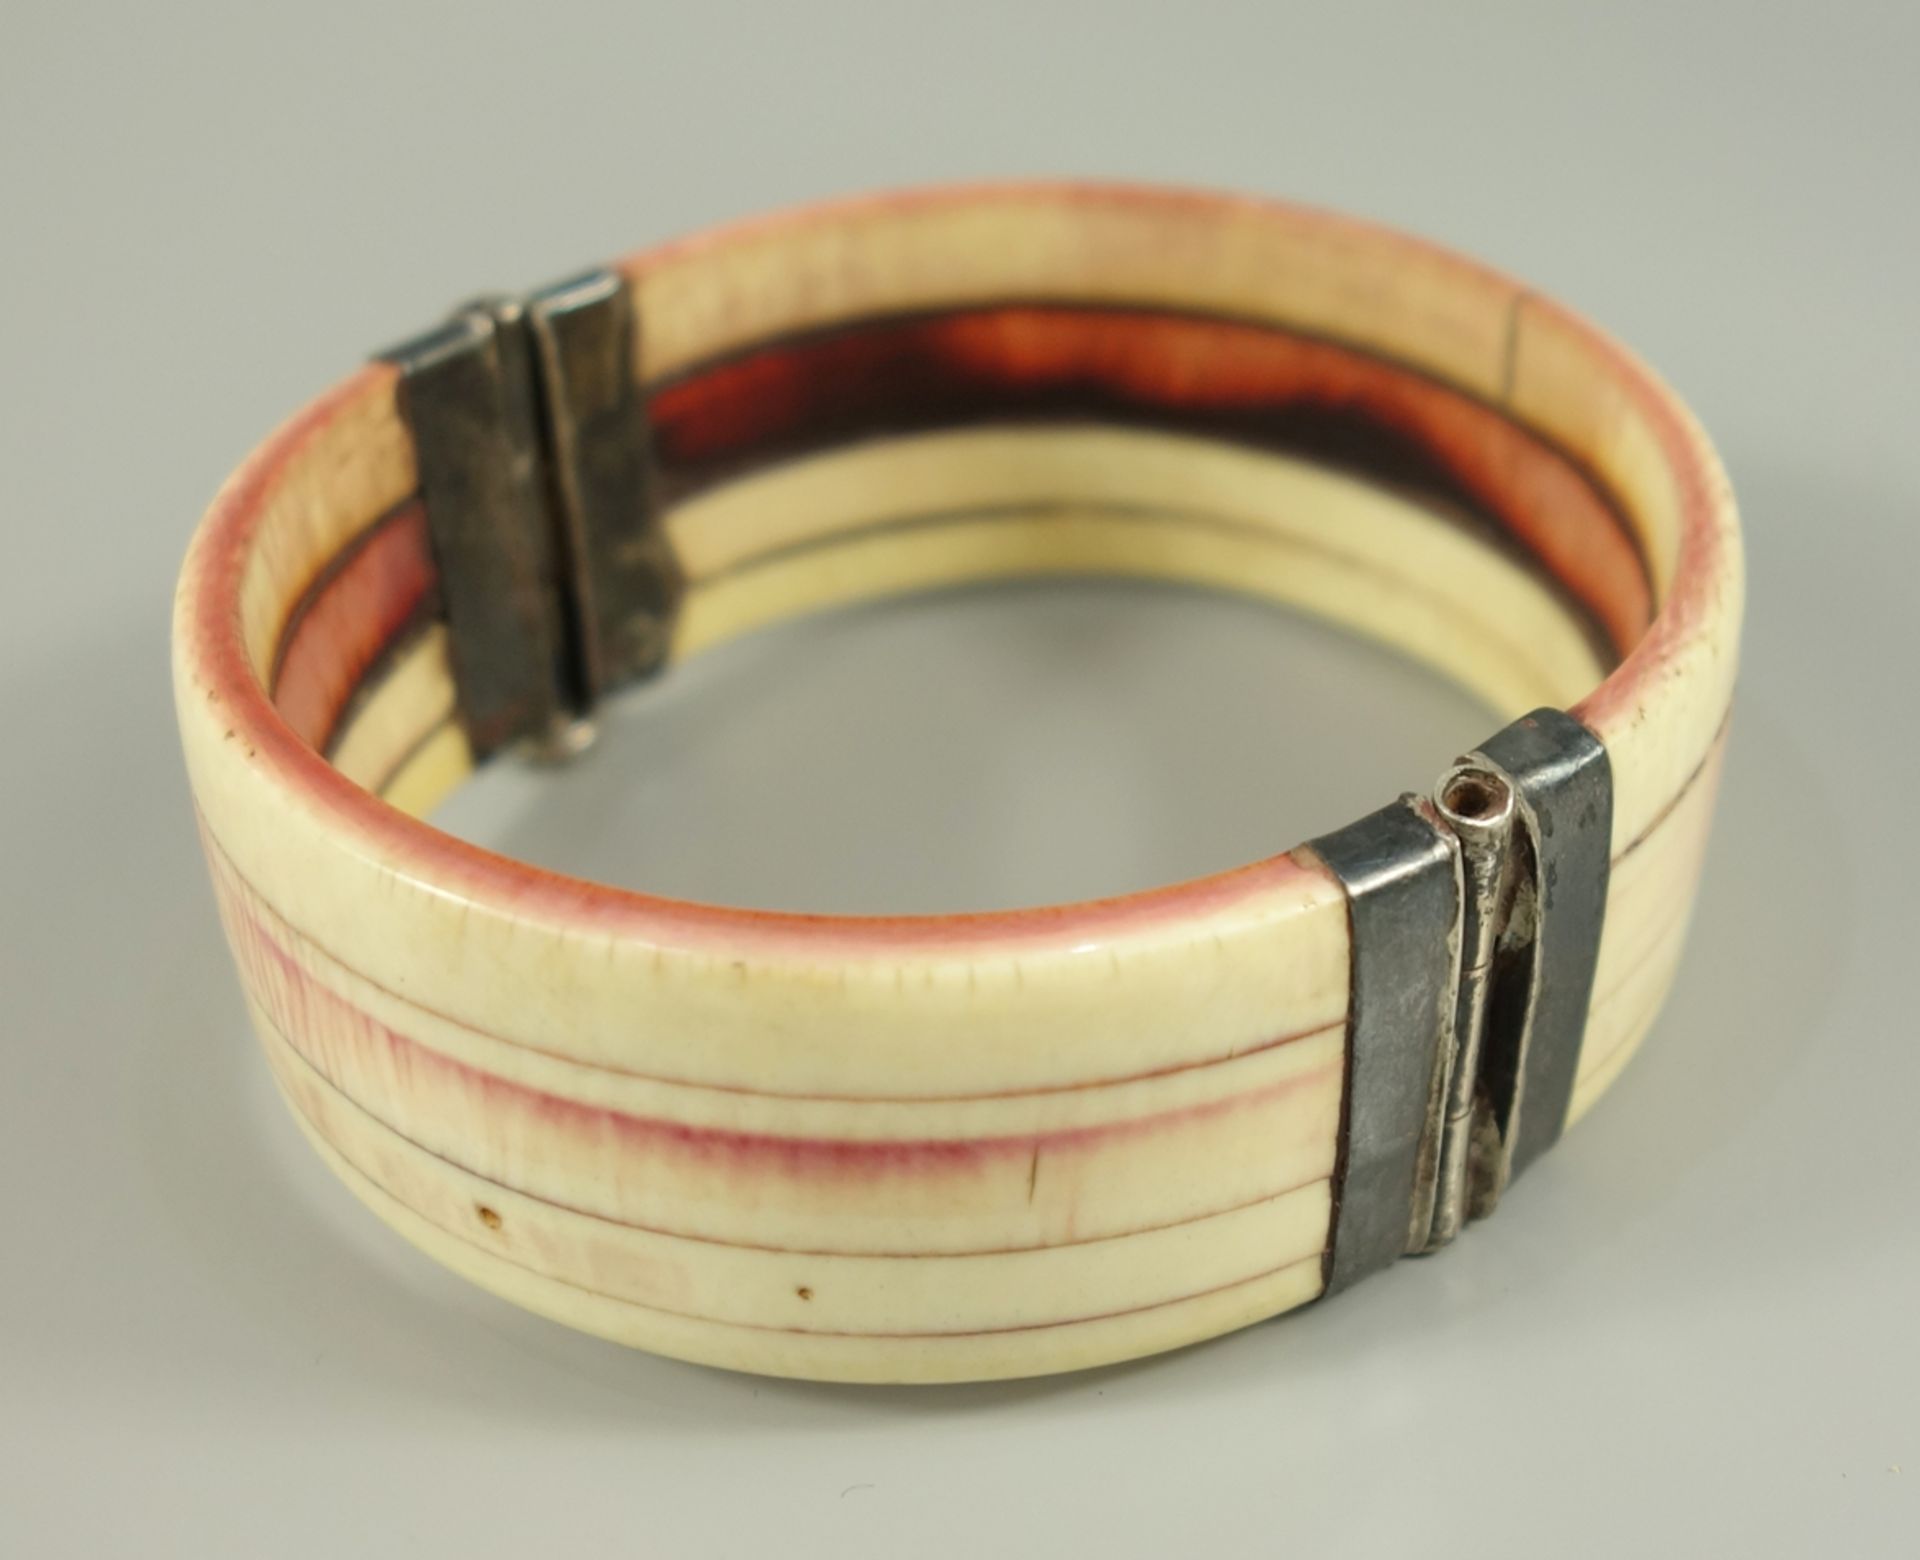 Bangle of bone with silver mounting